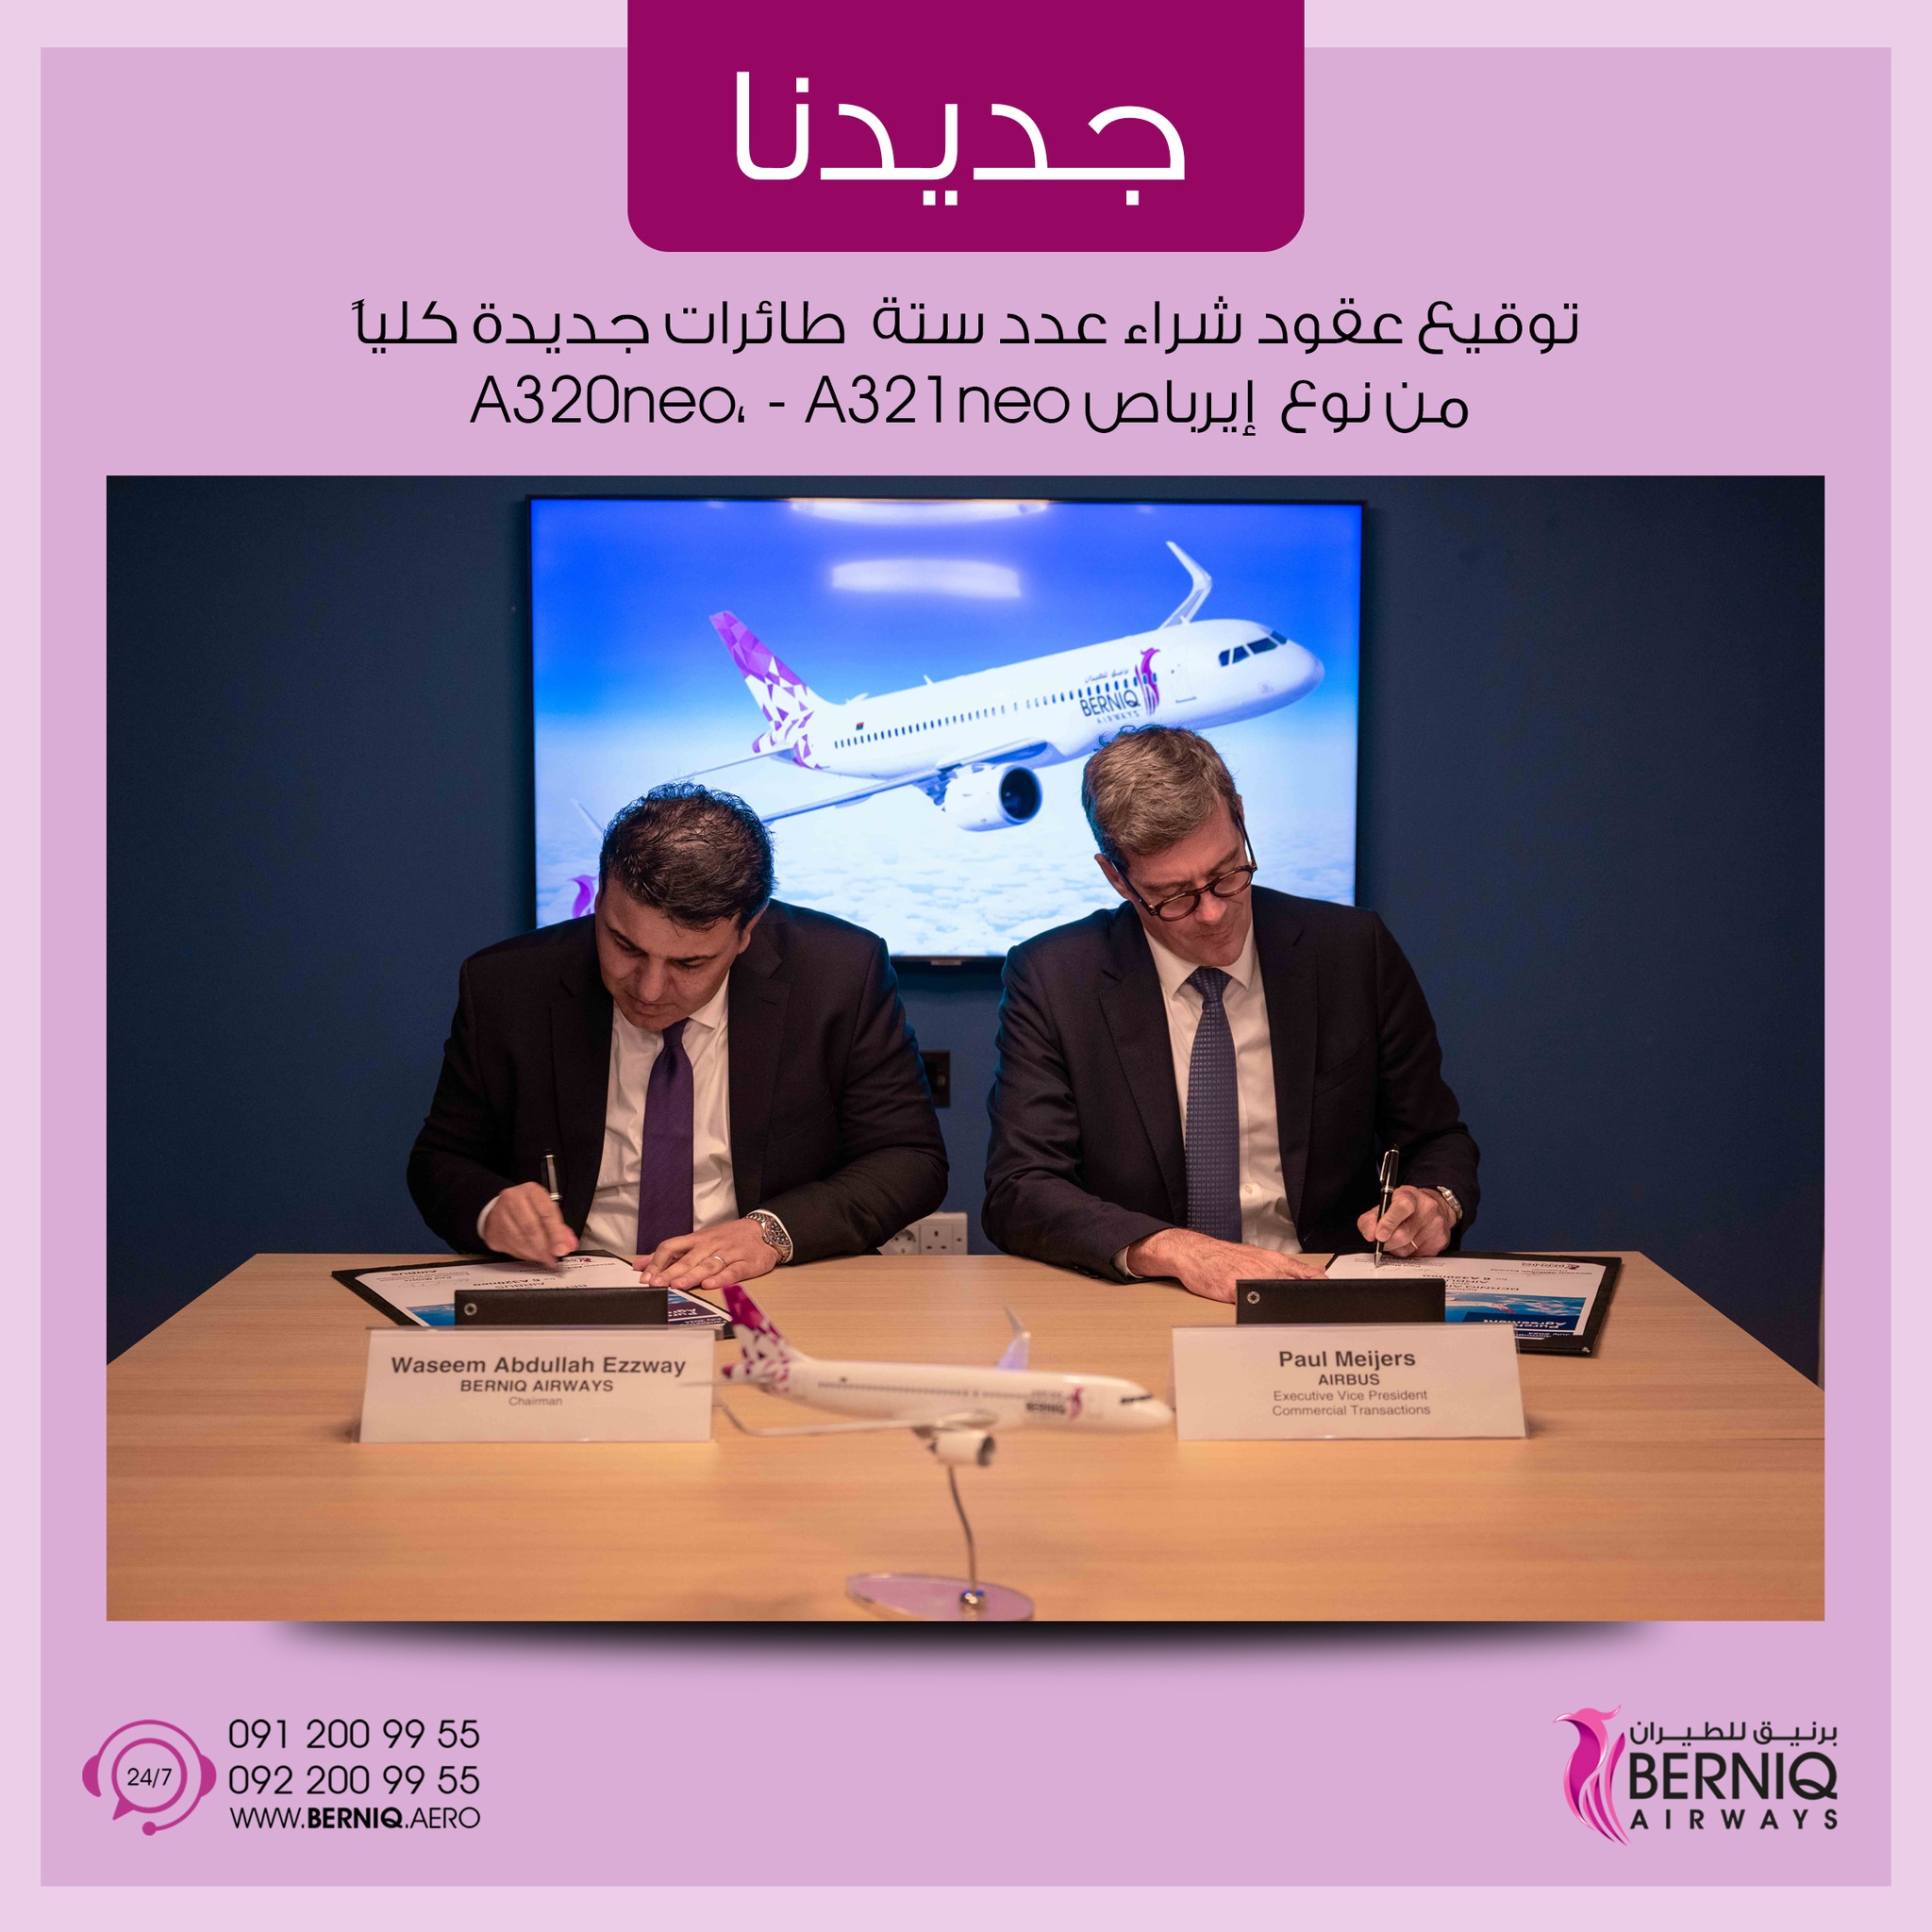 Berniq Airways Expands Fleet With Order For 6 A320neo and A321neo Aircraft.